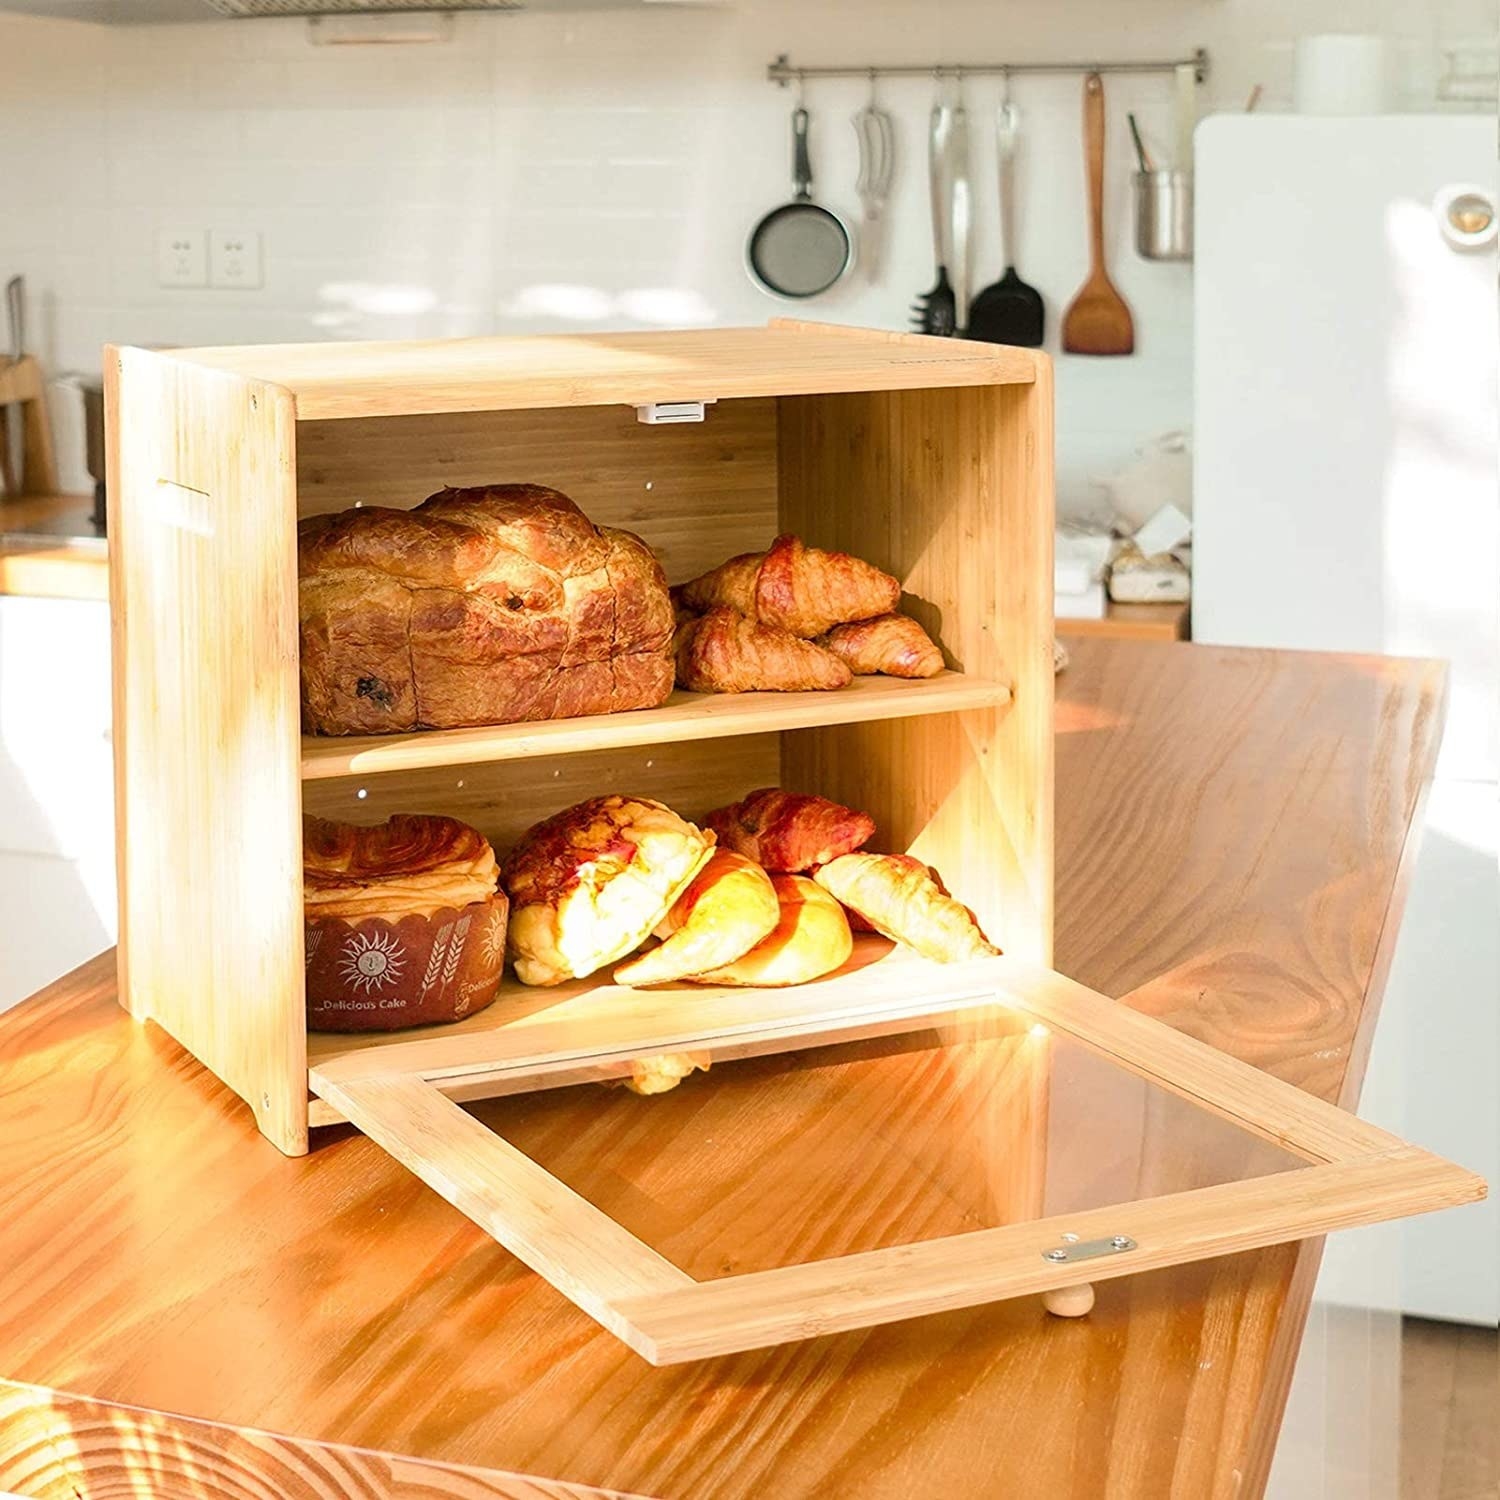 The bread box with several loaves inside